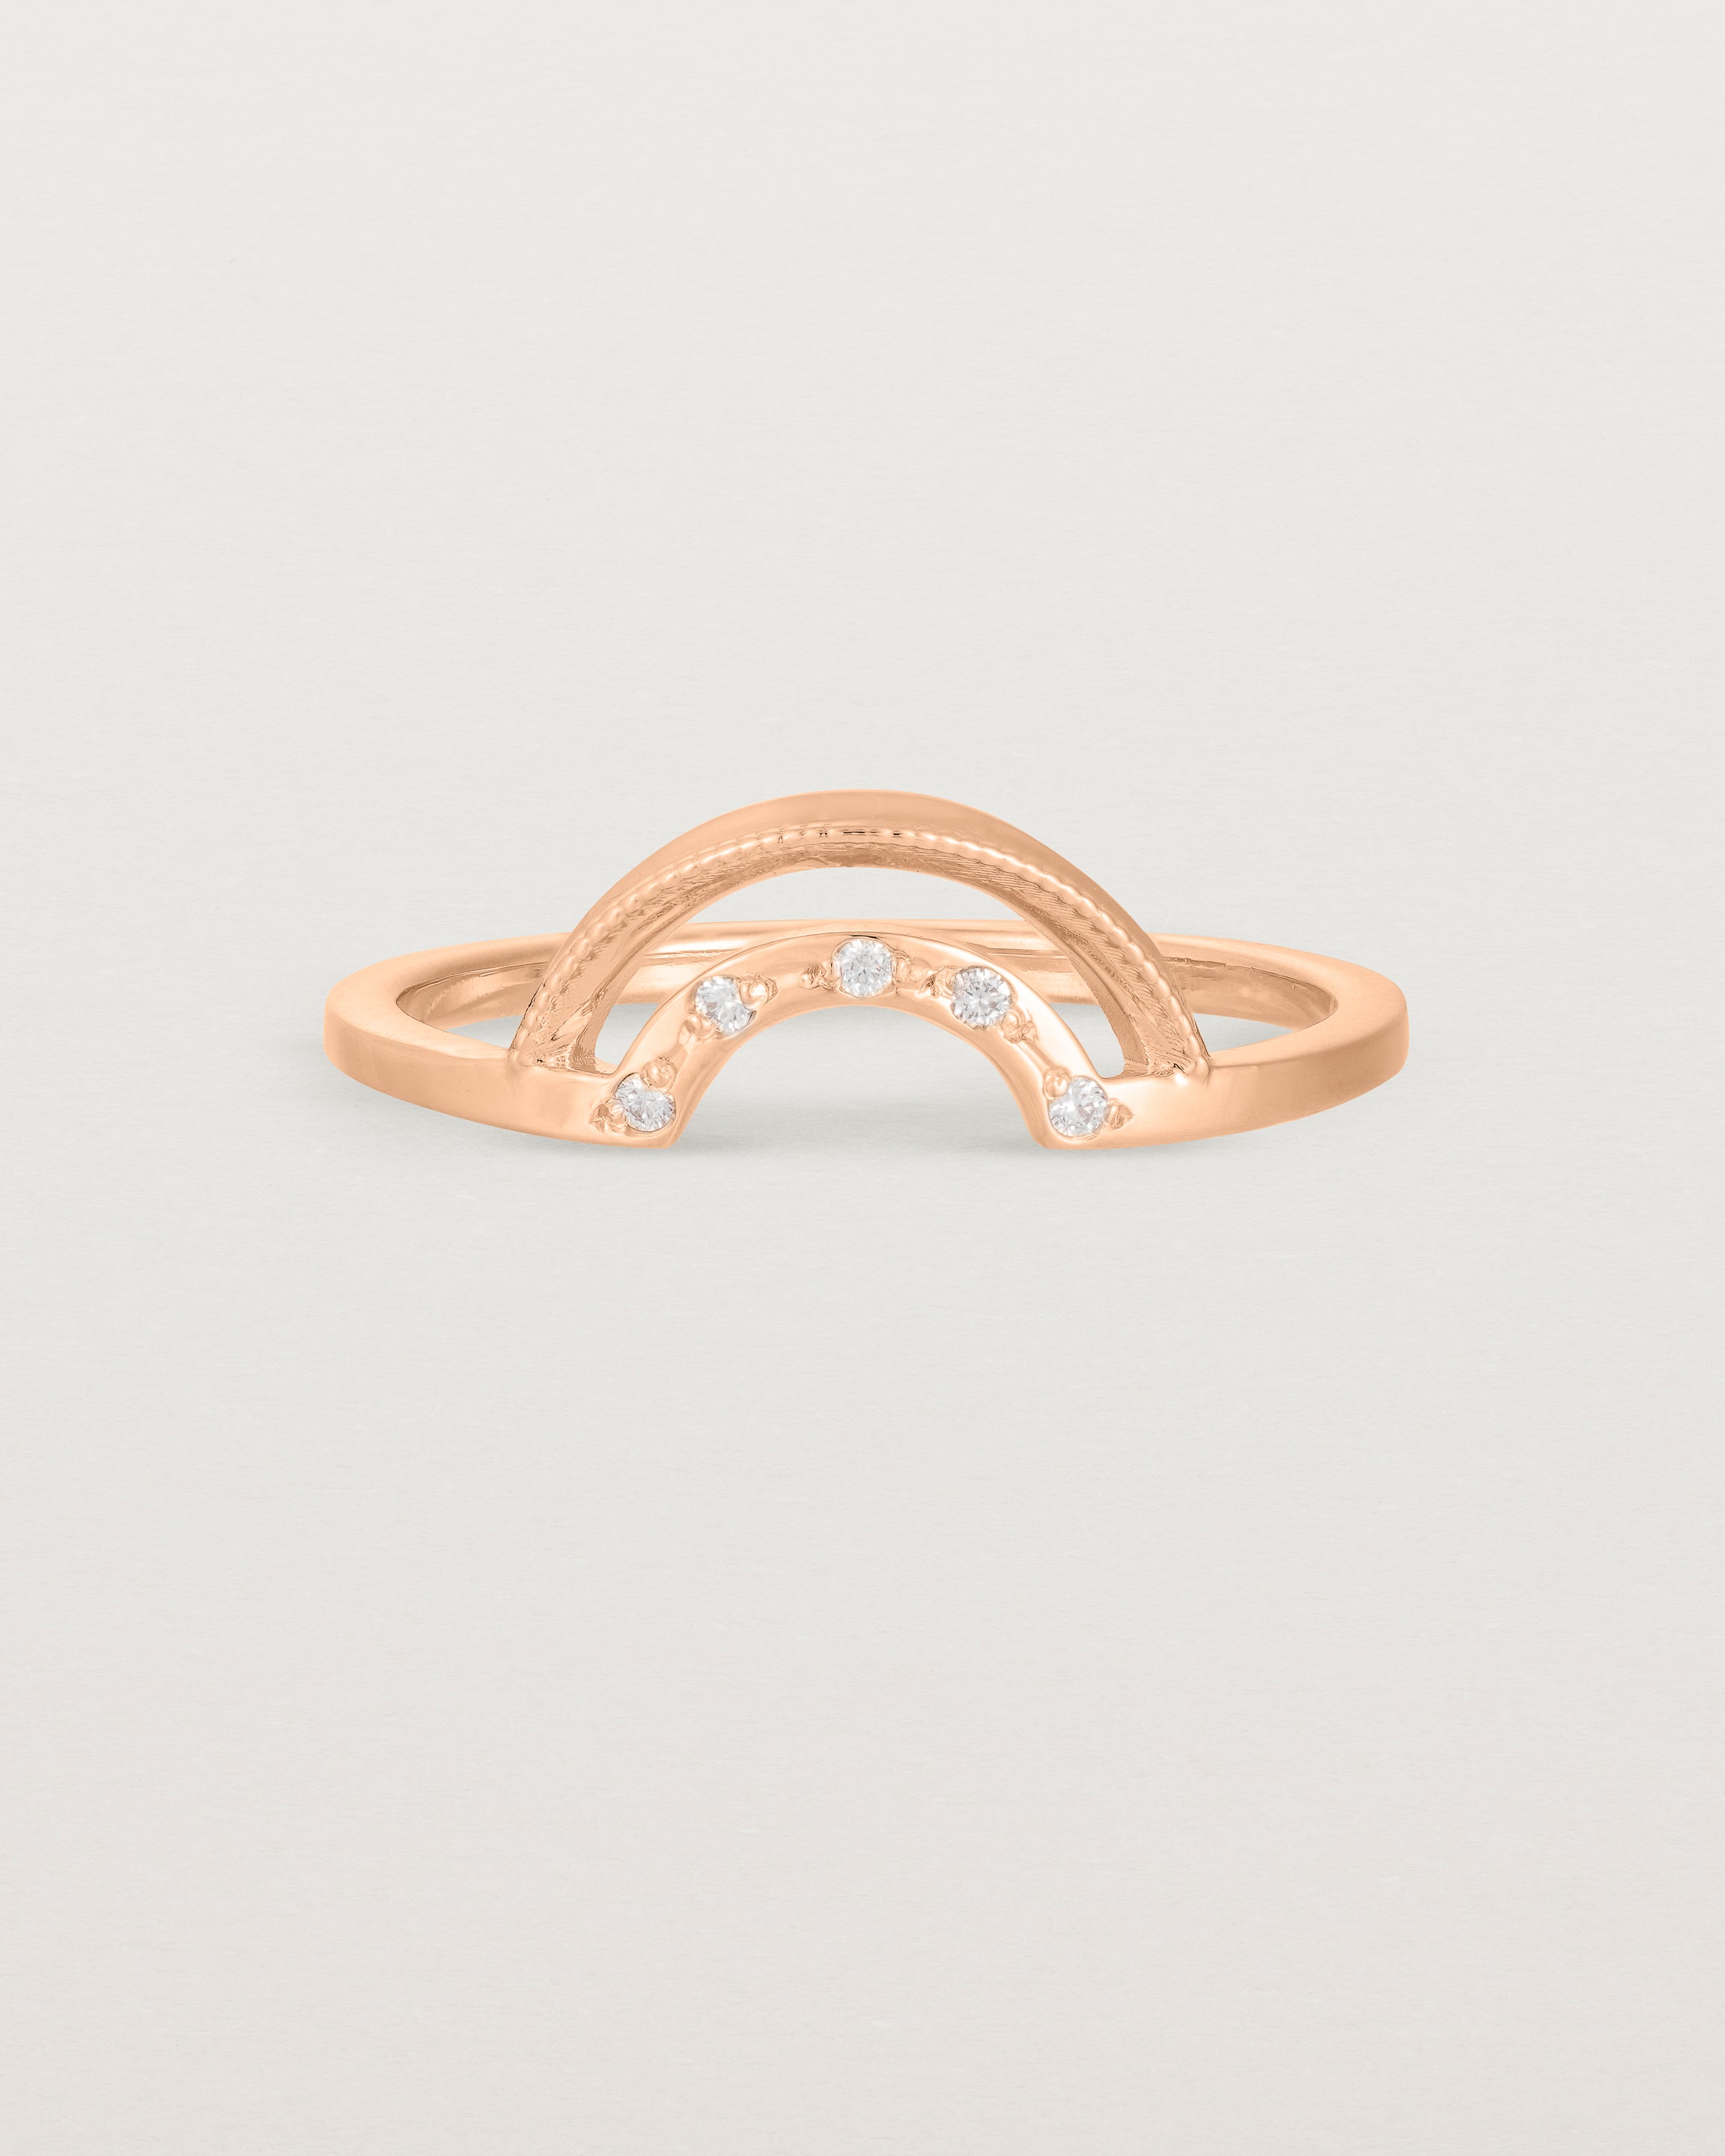 A double arc crown ring with white diamonds adoring the inner arc - crafted in rose gold. 